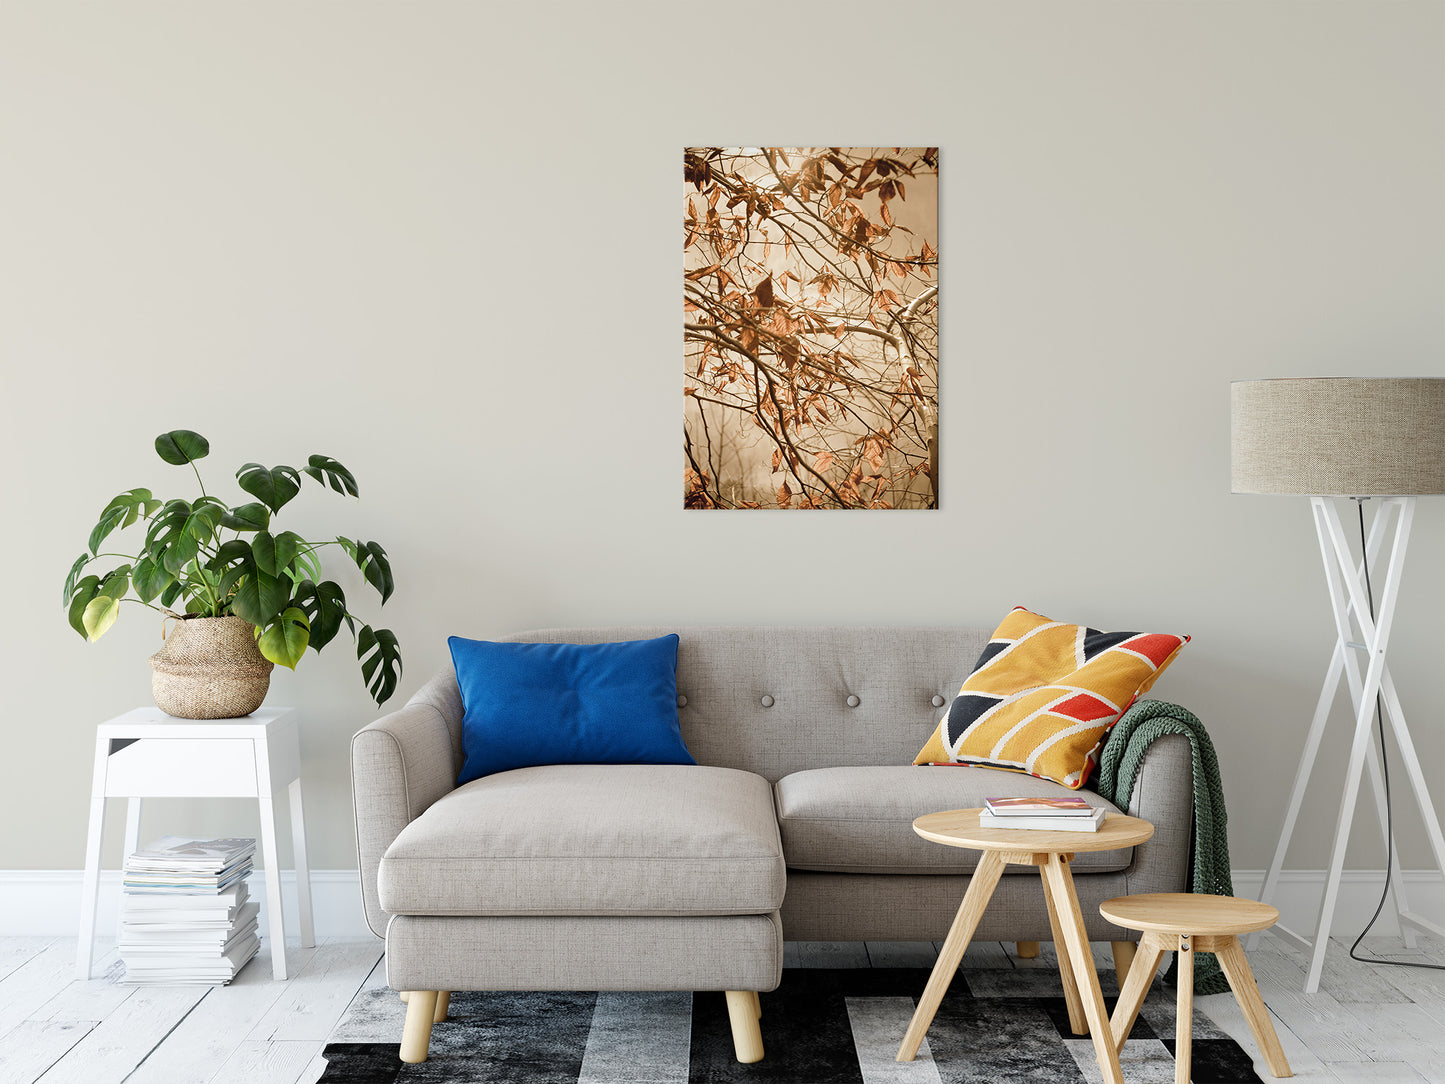 Rustic Canvas Wall Art: Aged Winter Leaves Botanical / Nature Photo Fine Art Canvas Wall Art Prints 24" x 36" - PIPAFINEART